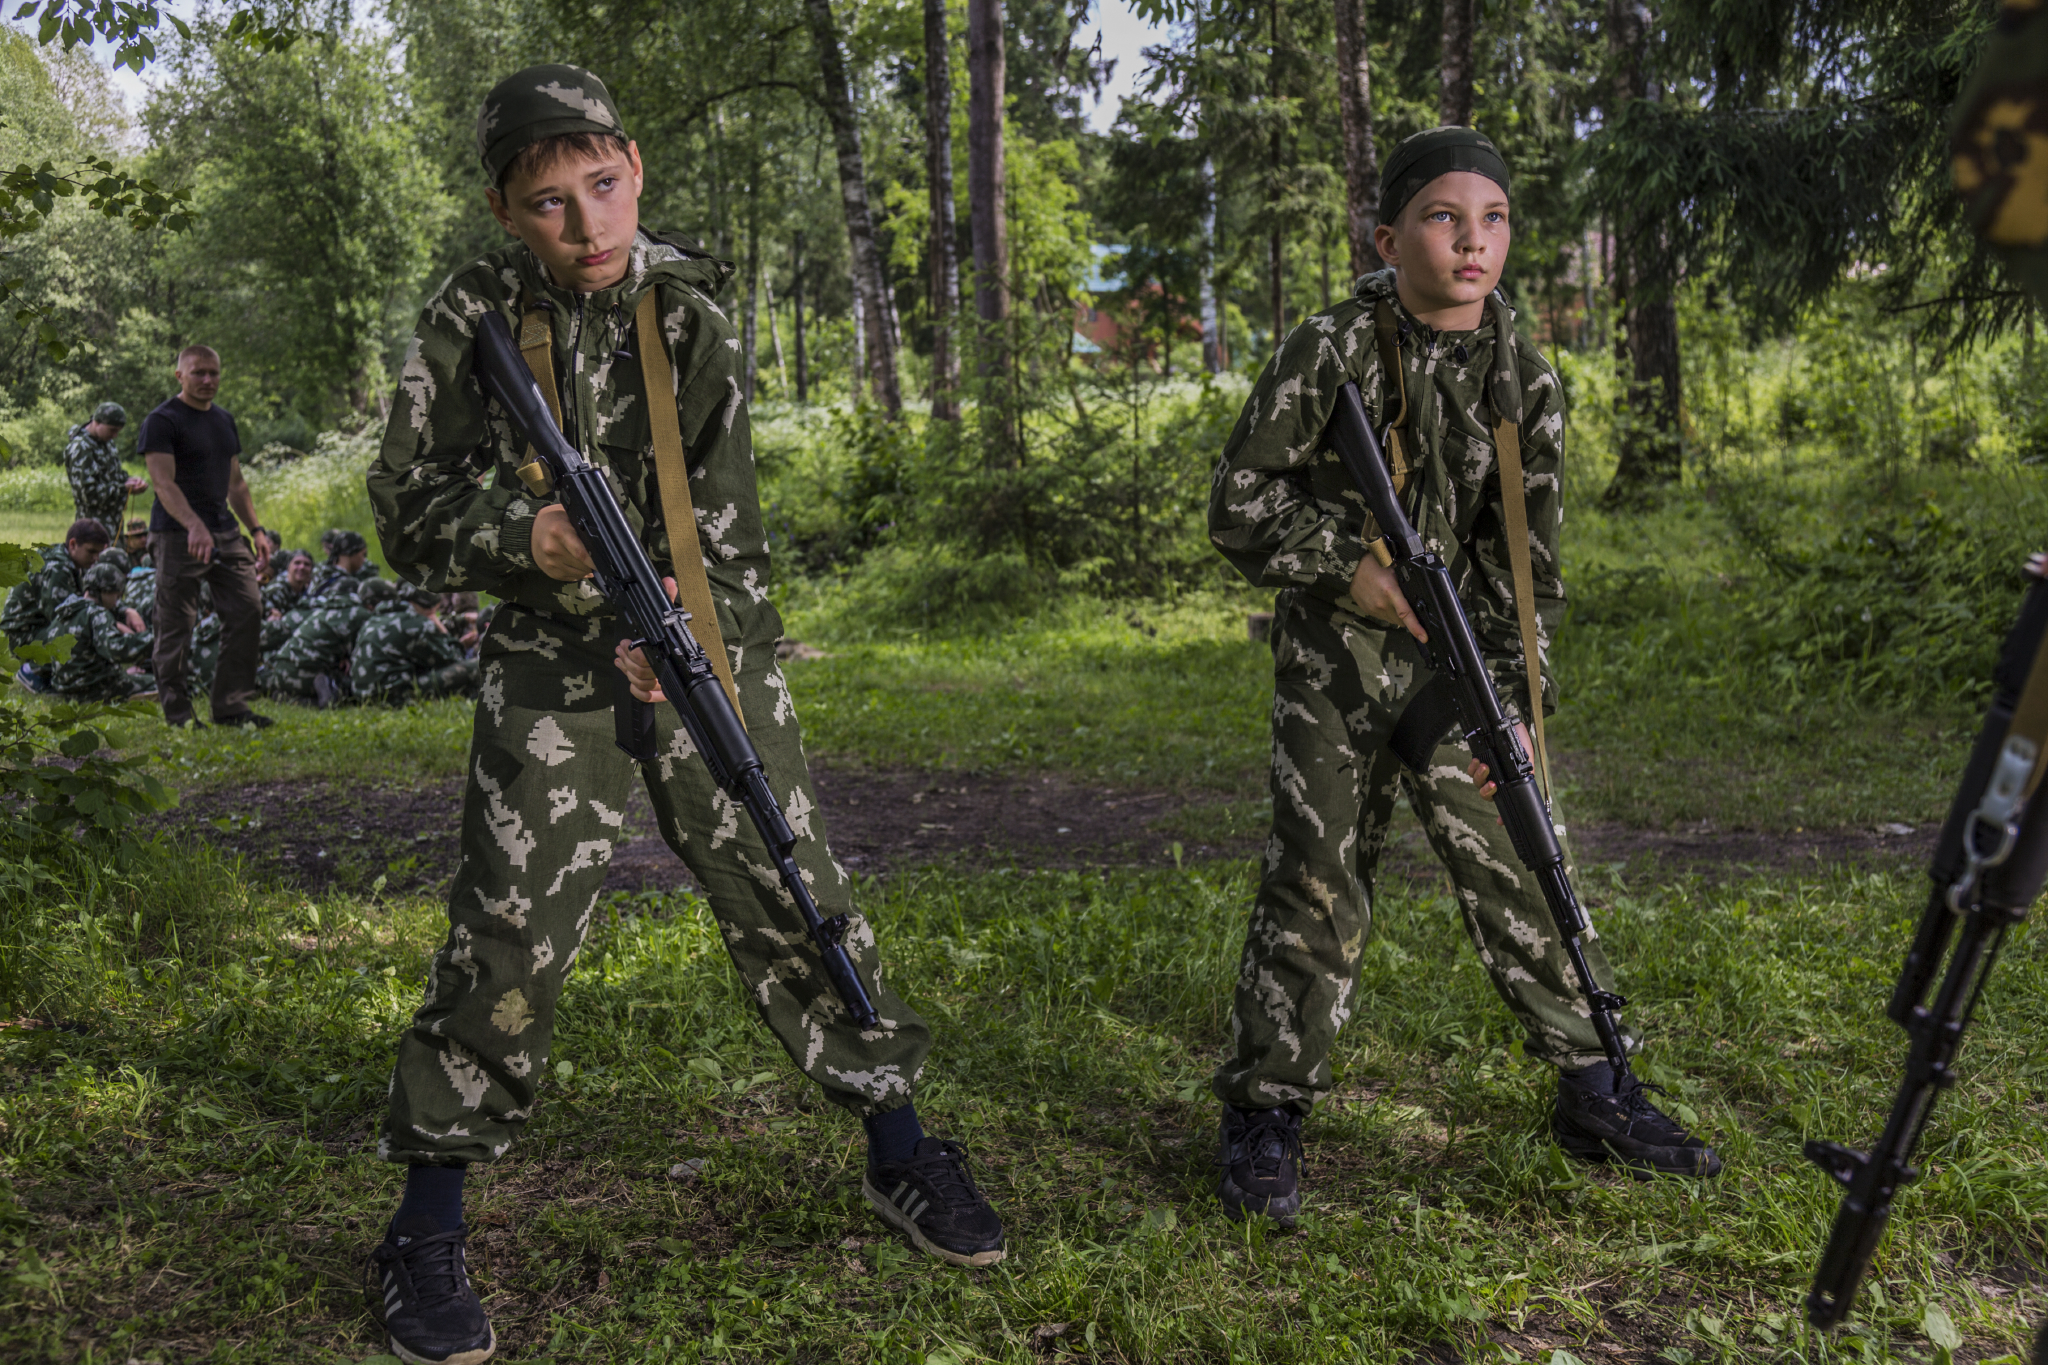  At a sports and military camp, paratroopers teach children as young as 10 years old how to handle weapons. Putin has tried to restore Russian pride in the country's military by defeating rebels in Chechnya, seizing Crimea, invading Ukraine, and inte